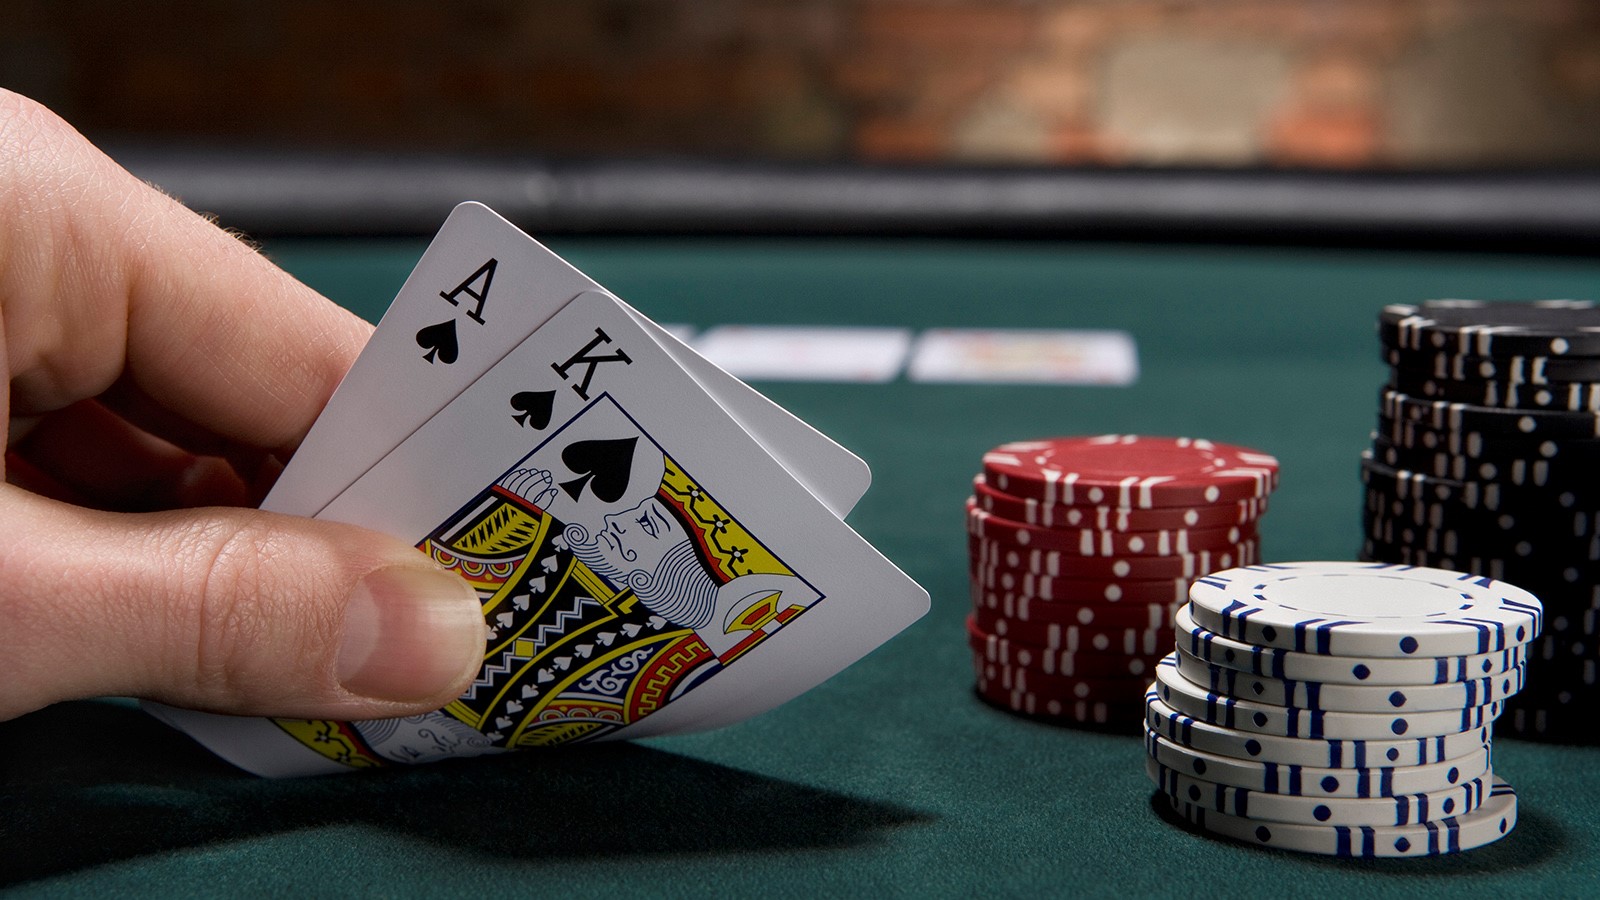 Few Notes on How to Play Blackjack for Beginners in an Online Casino